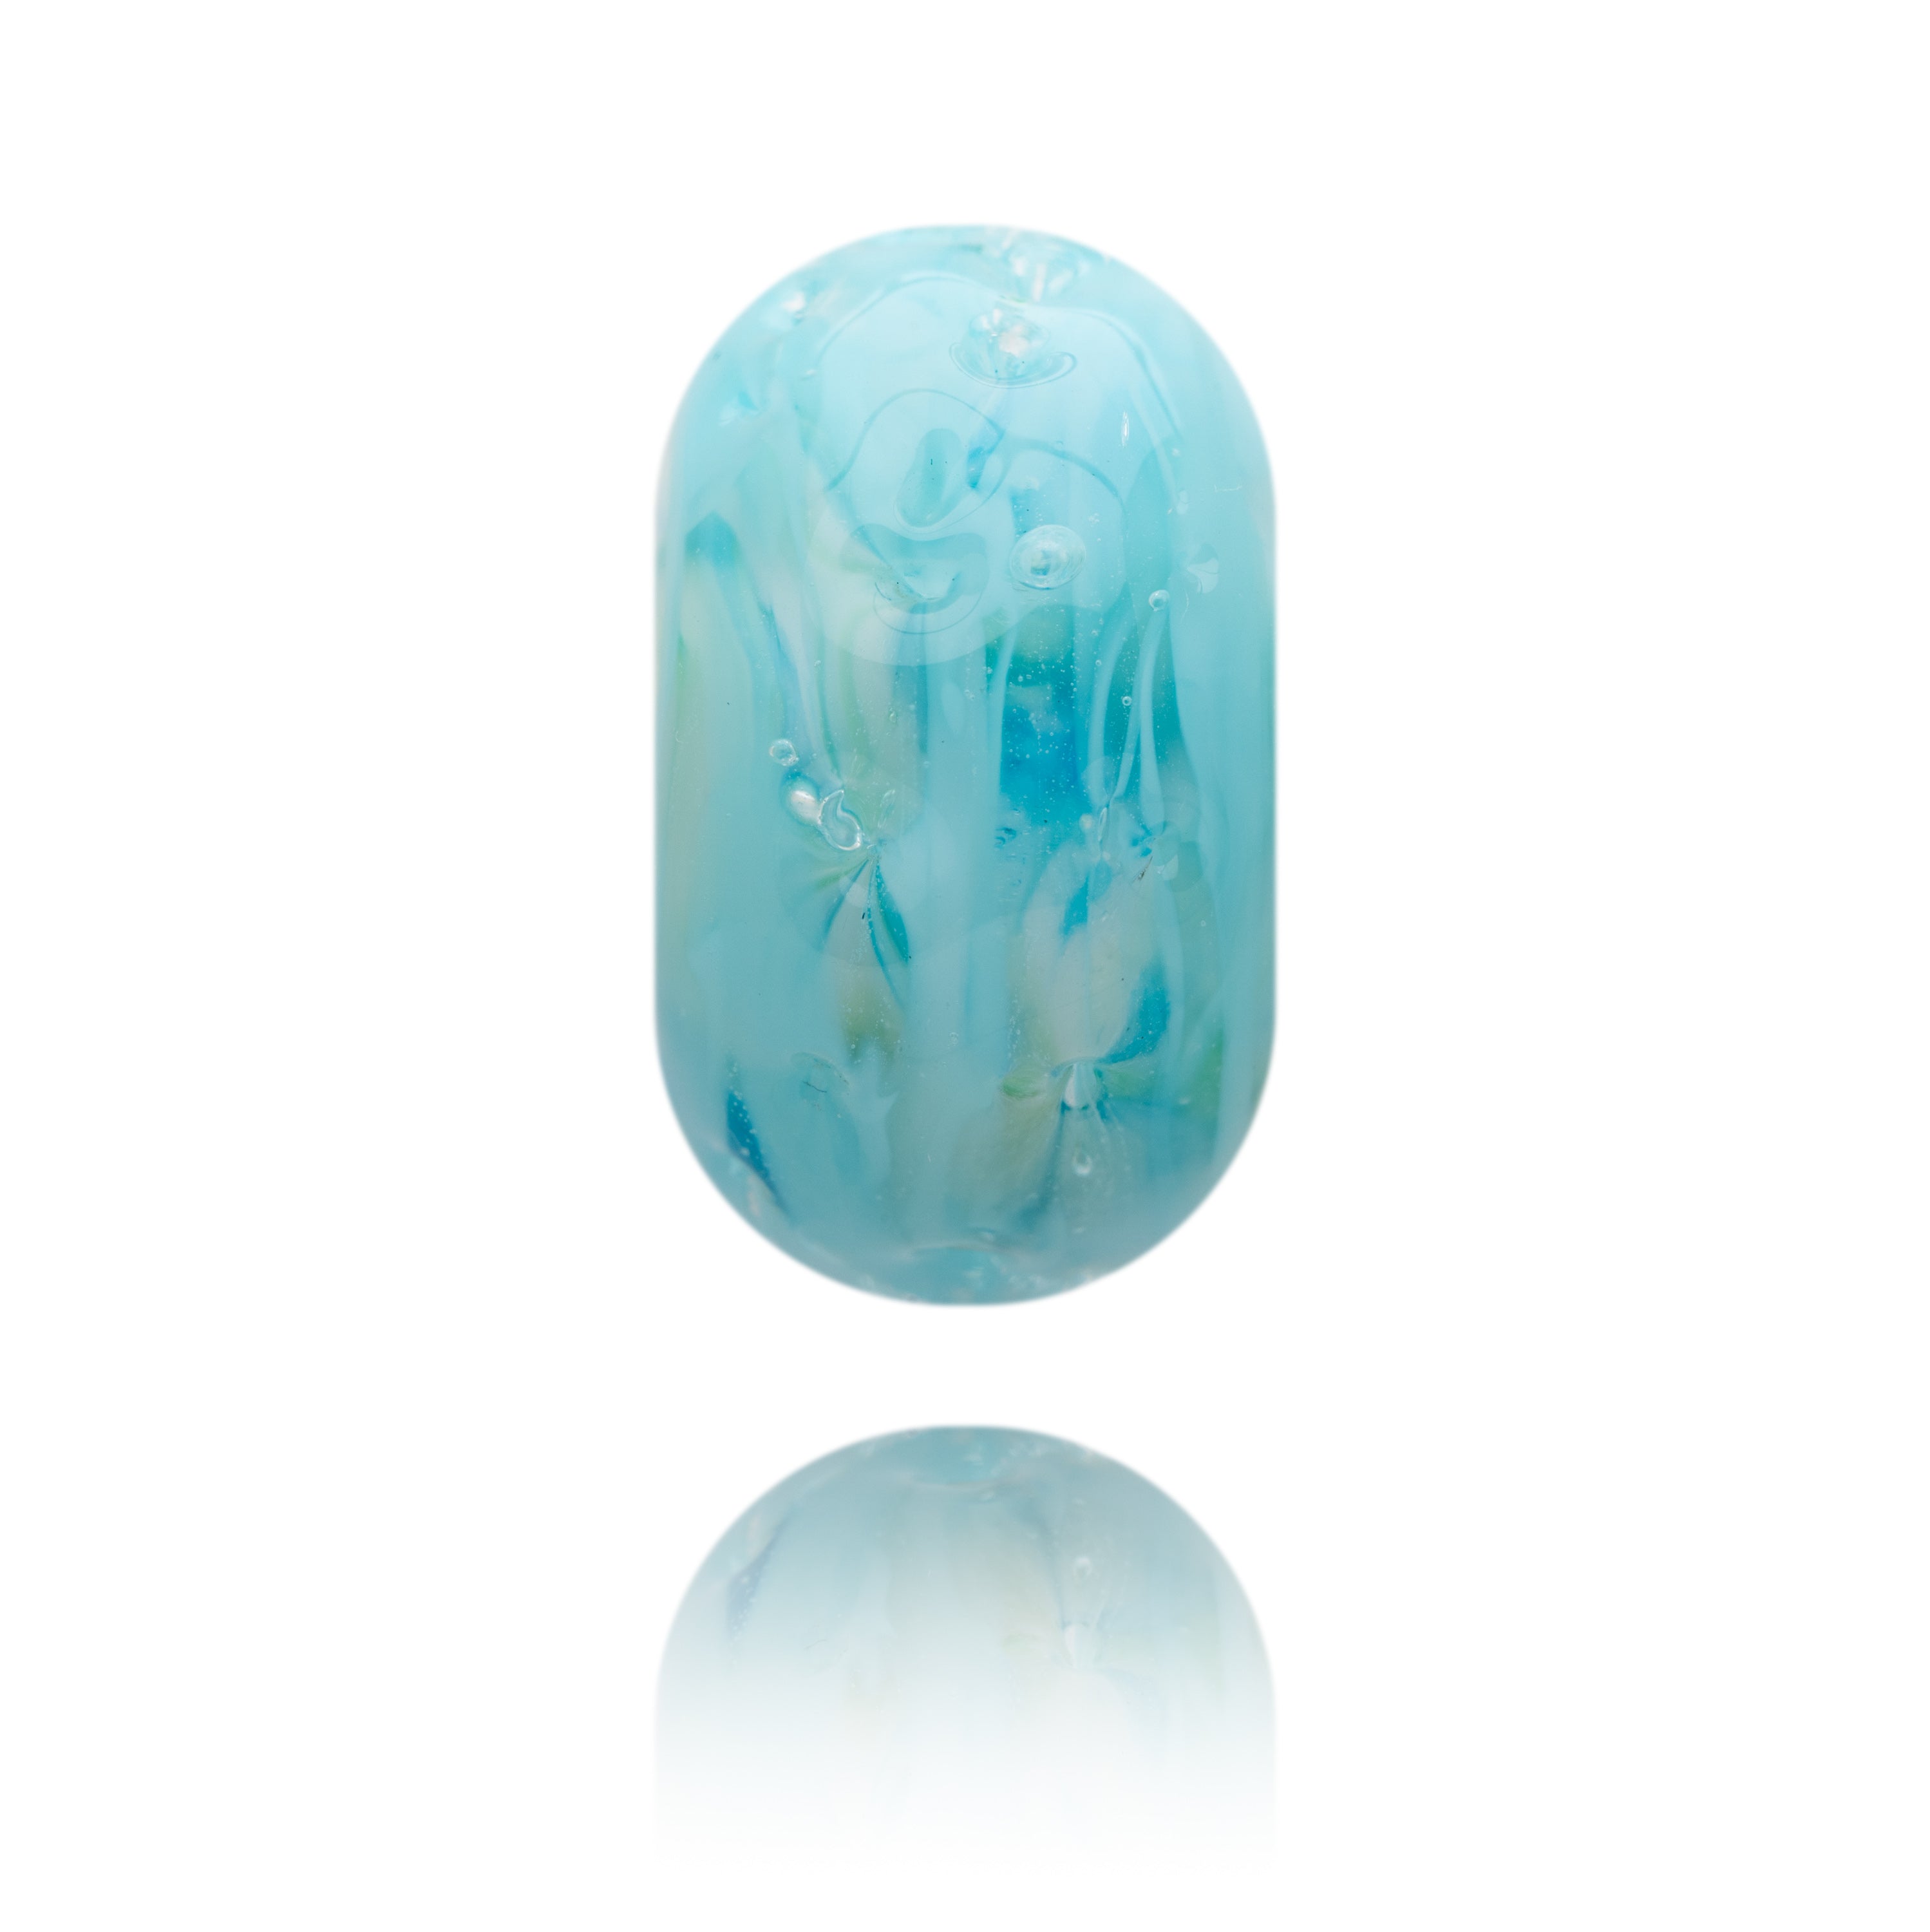 Turquoise glass beach inspired bead for Maenporth in Cornwall by Nalu Beads